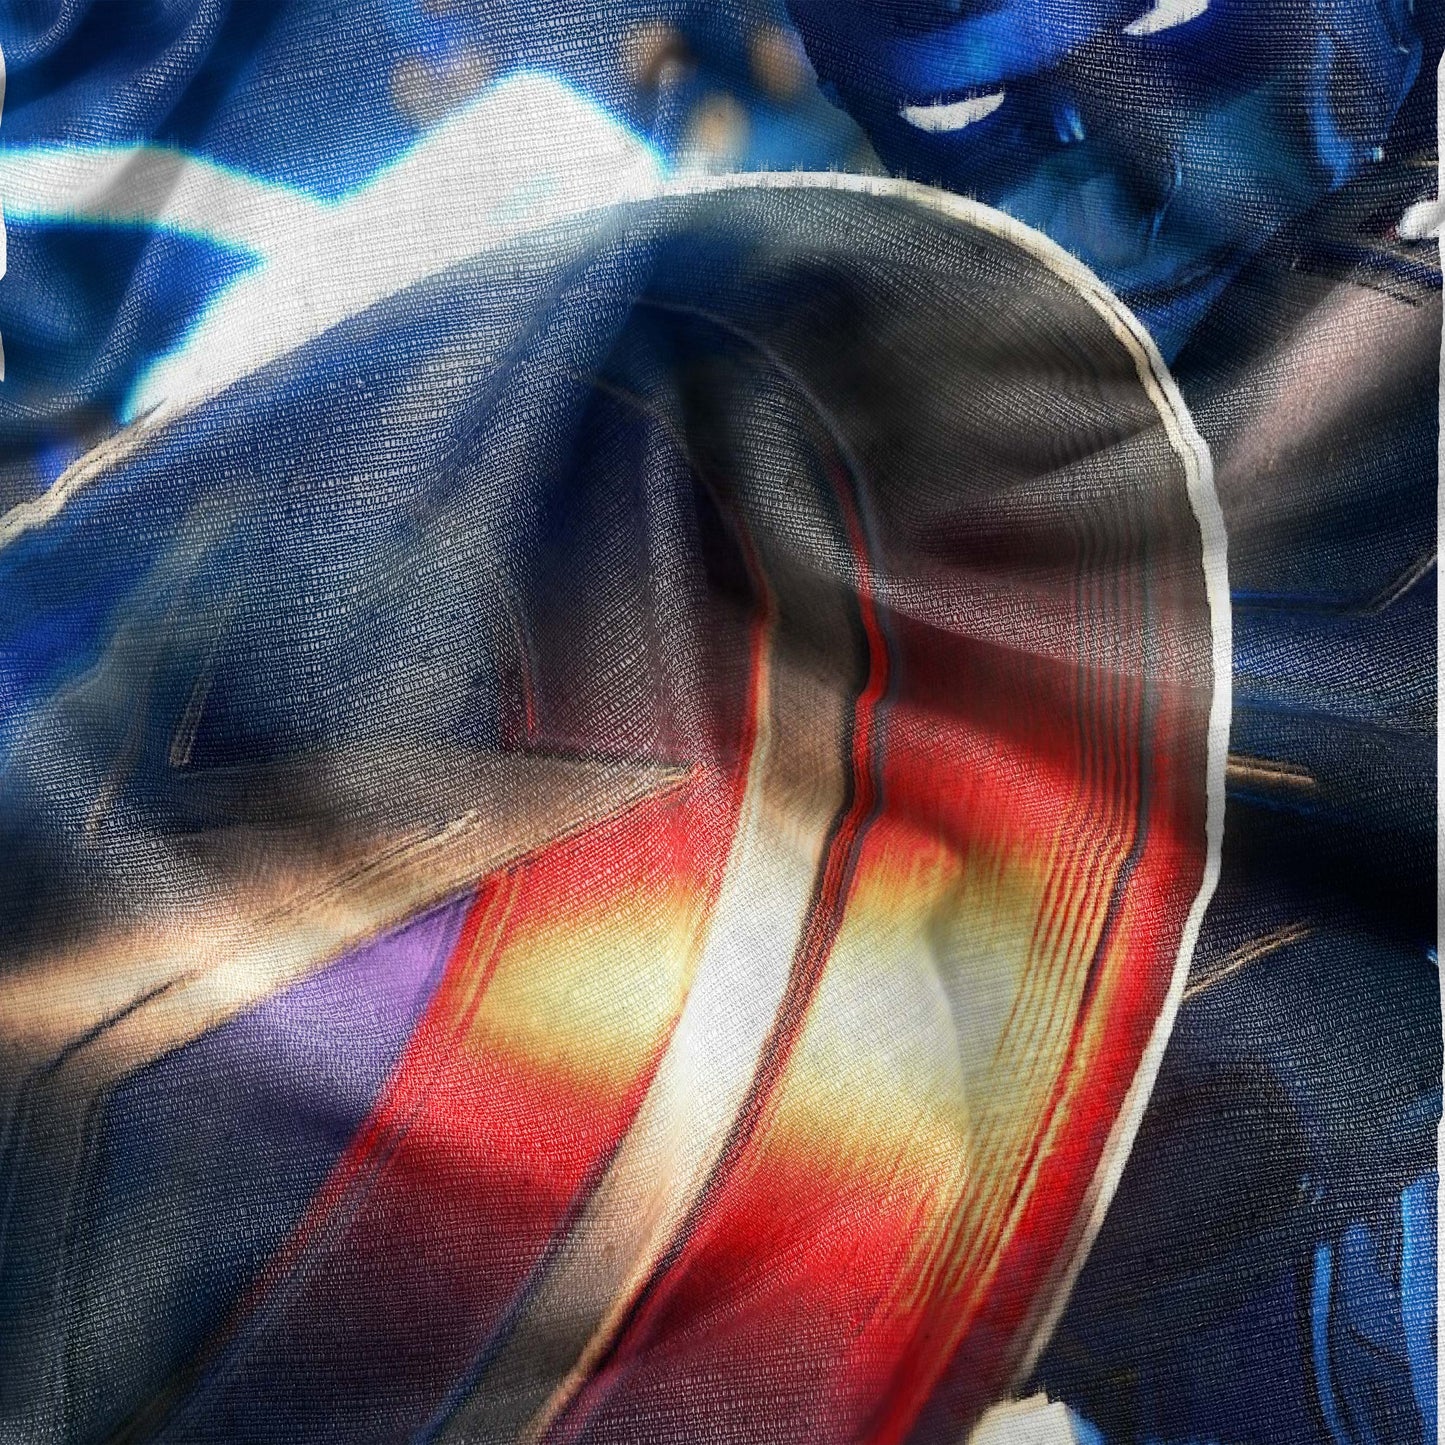 Captain America Cushion Cover trendy home